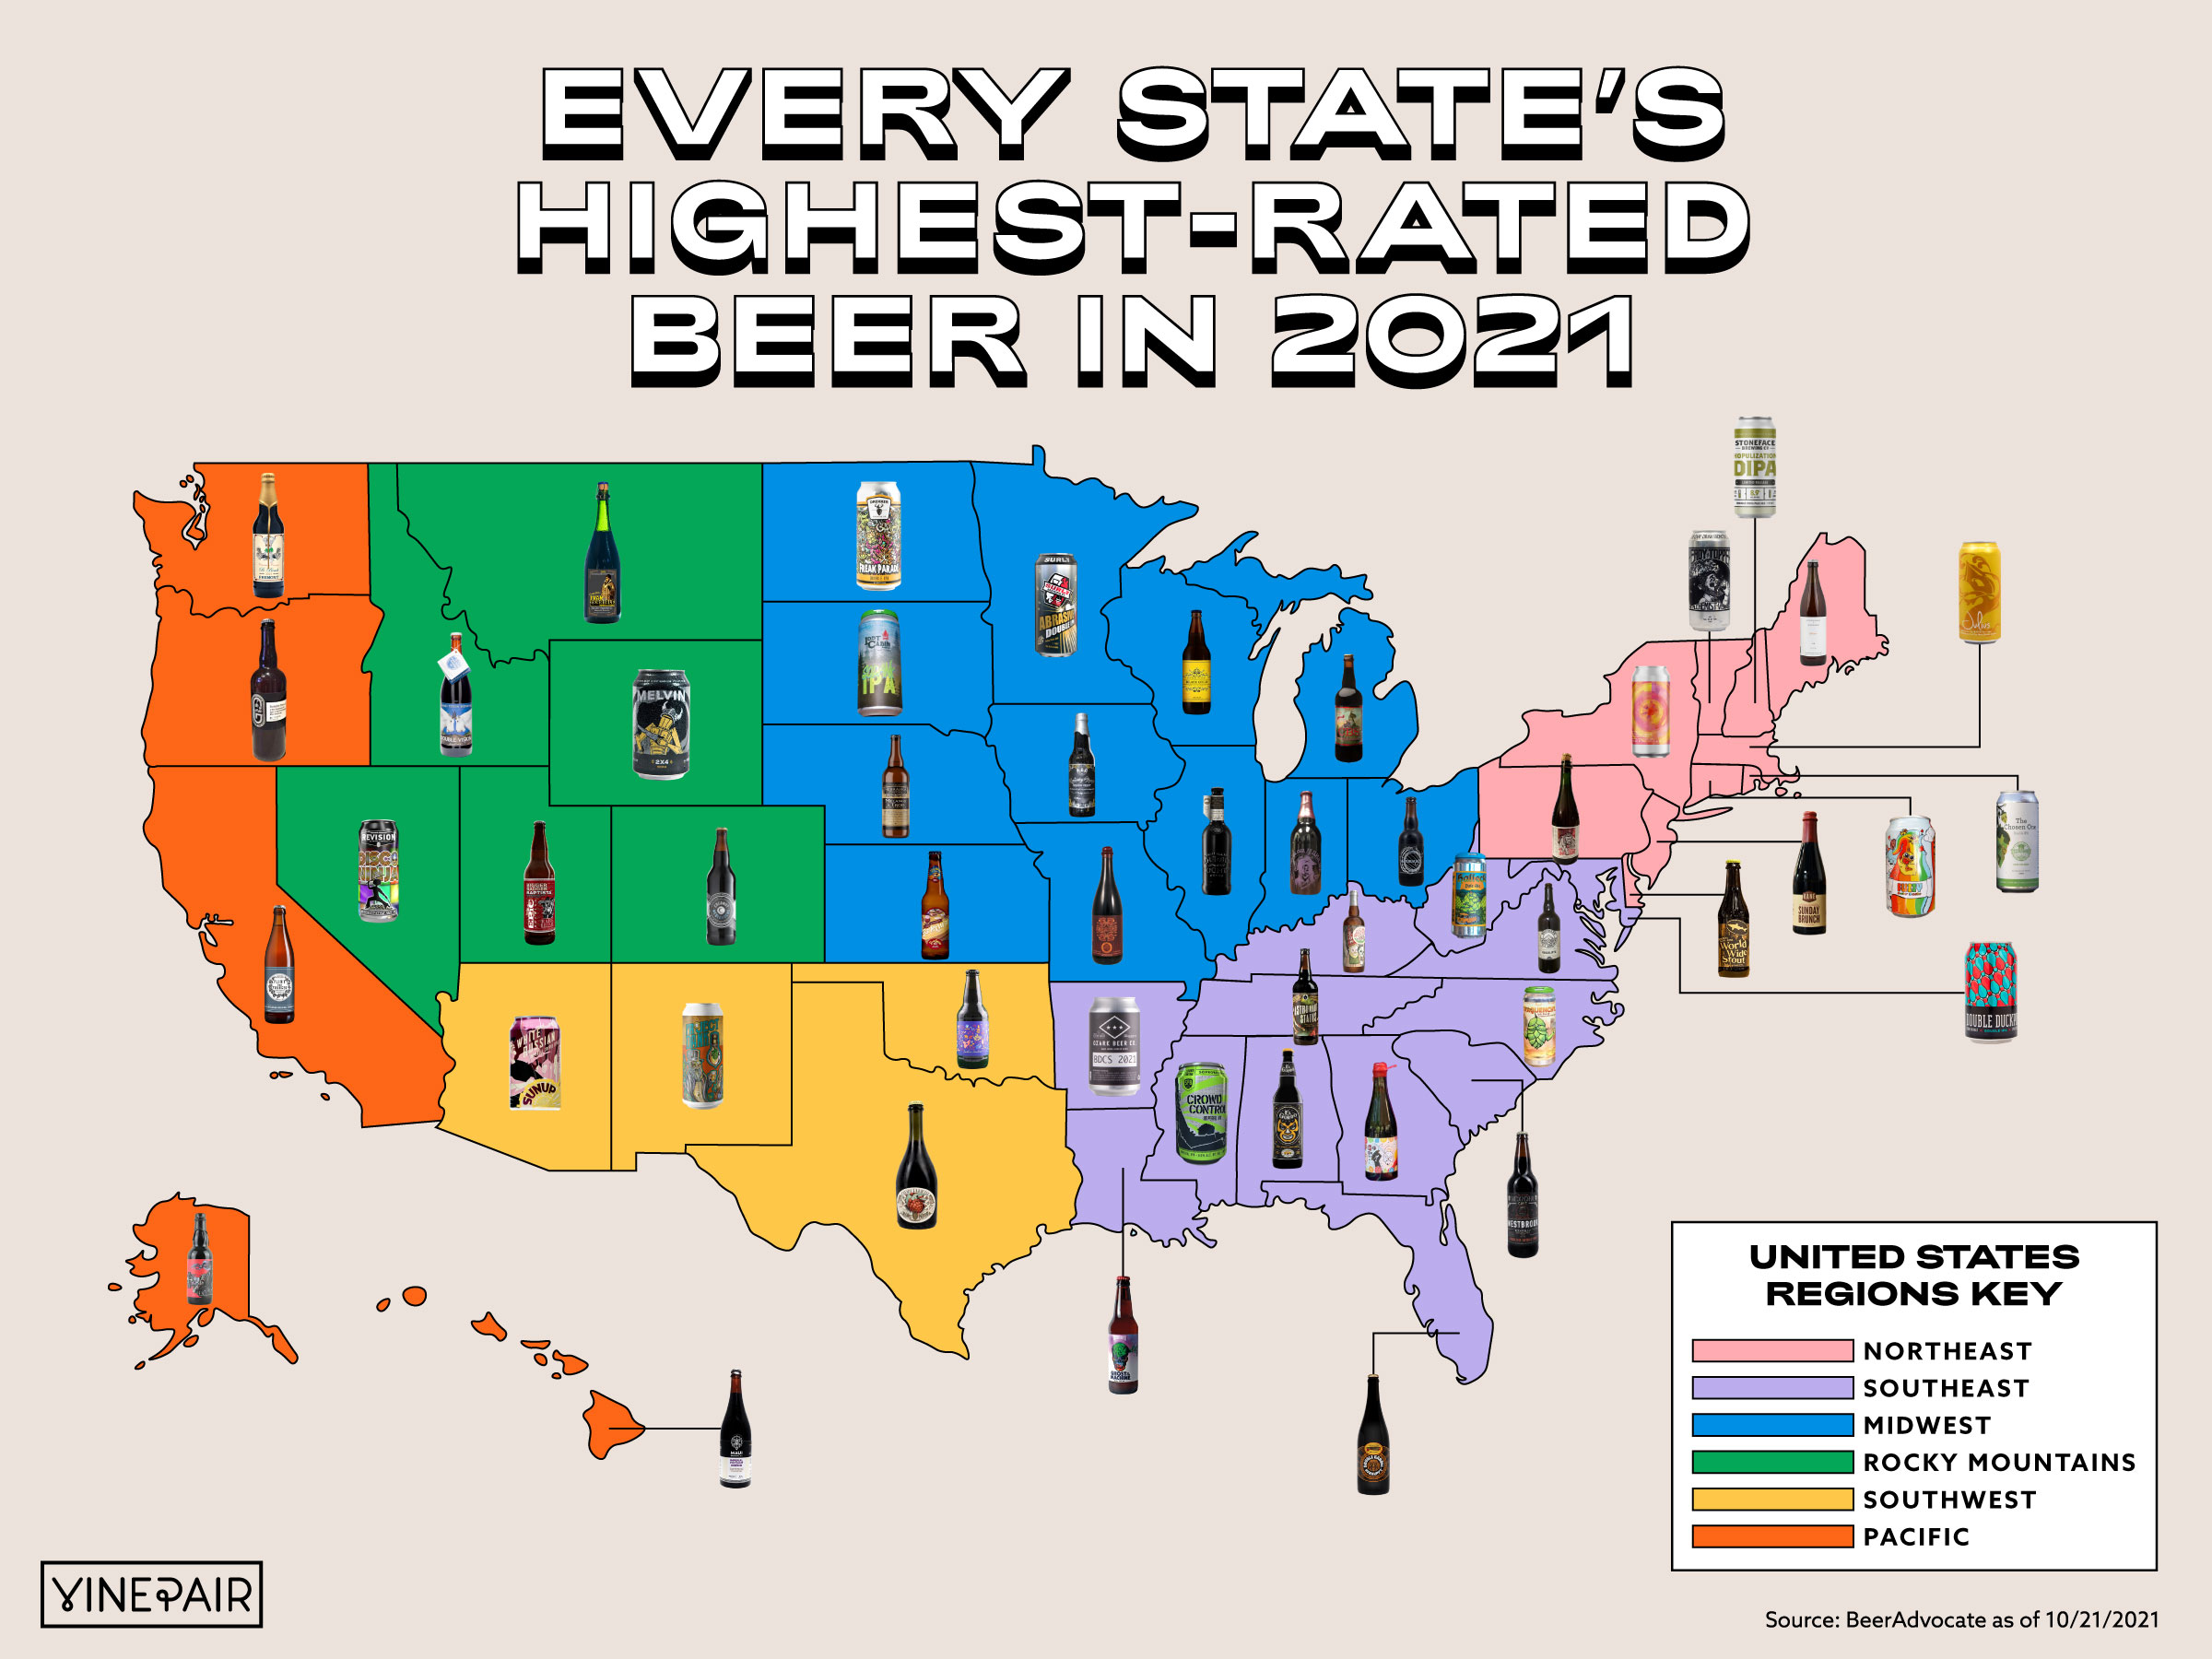 These are the Highest Rated Beers in Every State